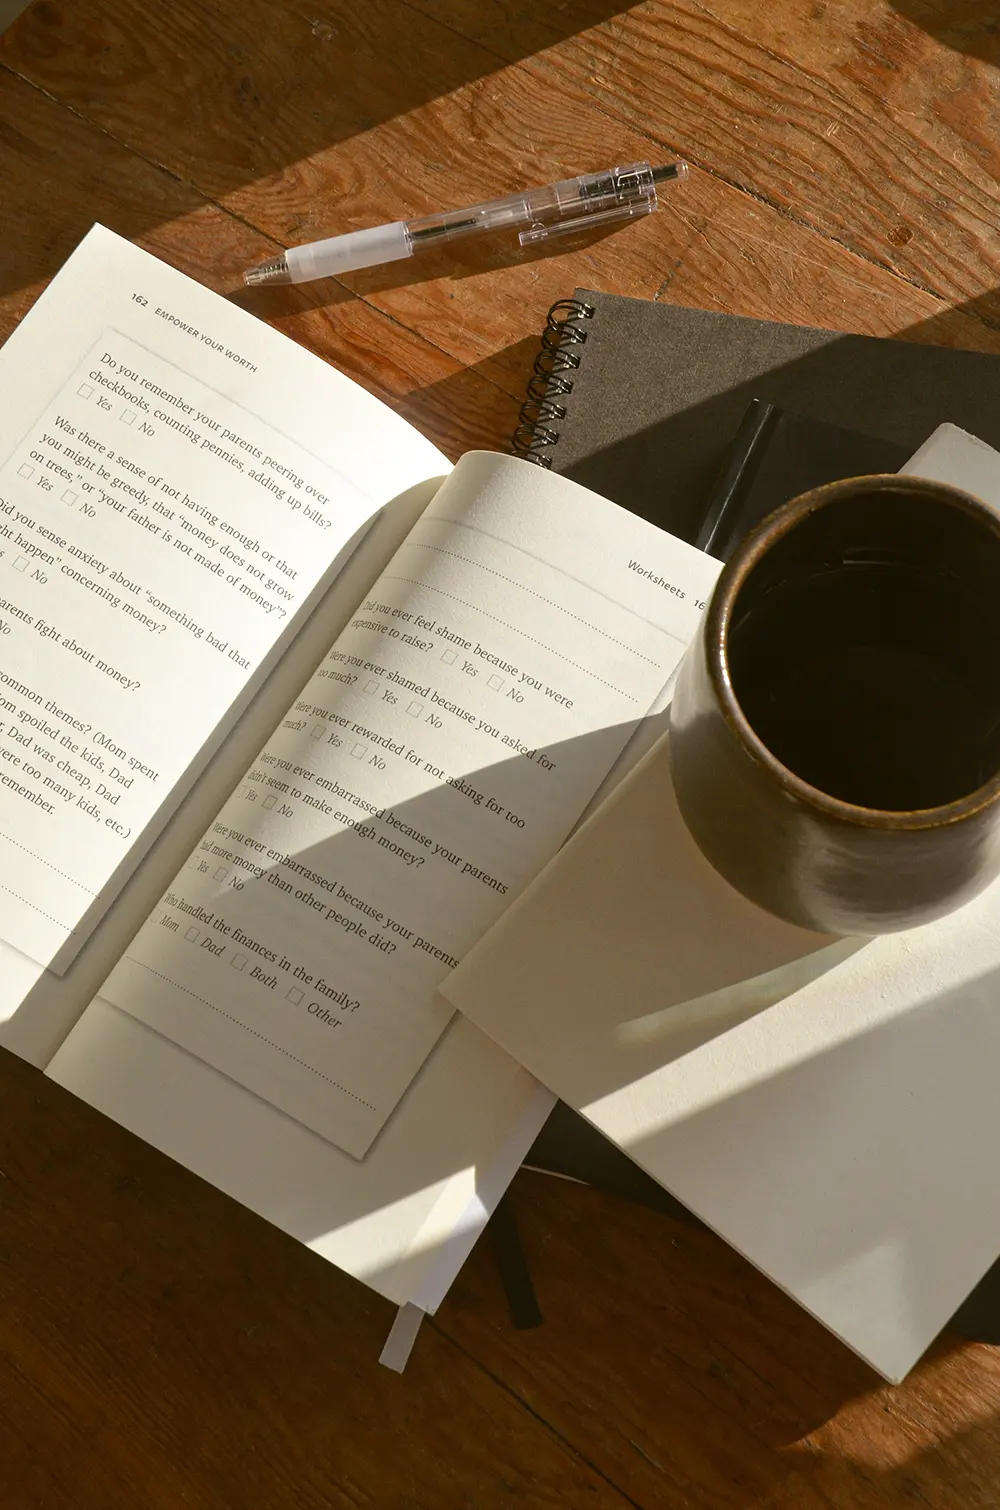 A book design example of an interior workbook design. The book is sitting on a desk with a pen and notebooks and a cup of coffee.